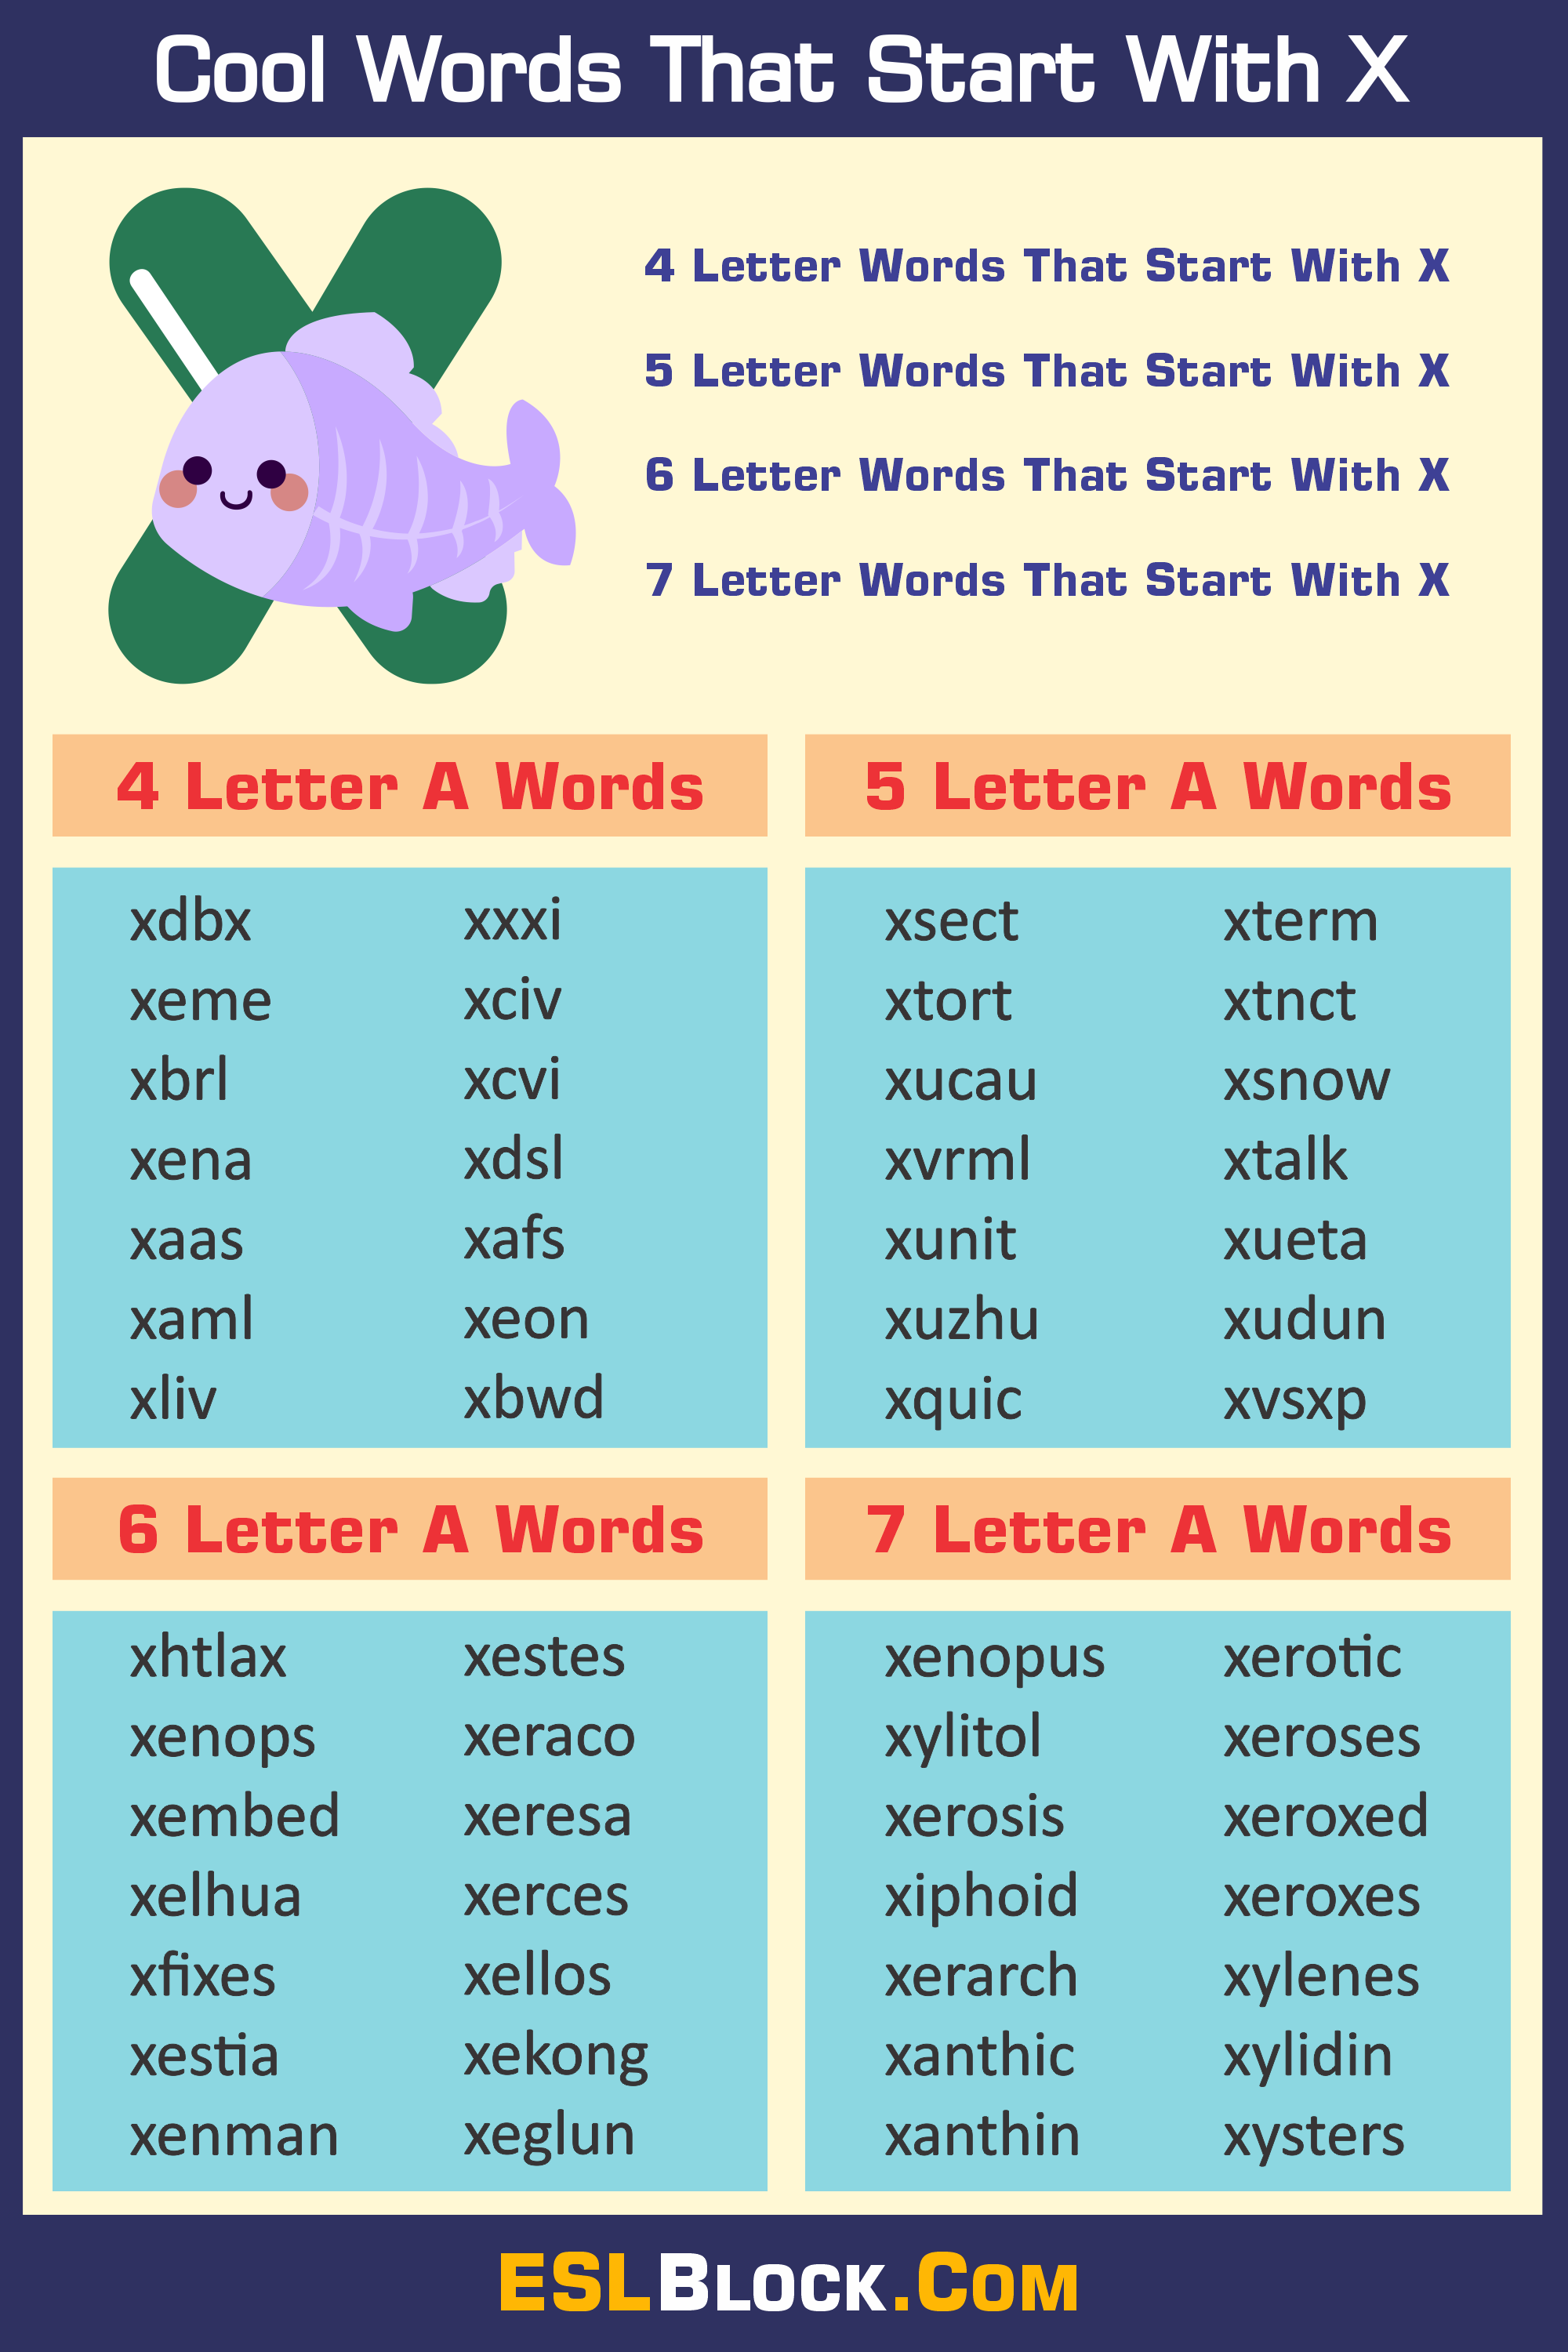 4 Letter Words, 4 Letter Words That Start With X, 5 Letter Words, 5 Letter Words That Start With X, 6 Letter Words, 6 Letter Words That Start With X, 7 Letter Words, 7 Letter Words That Start With X, Awesome Cool Words, Christmas Words That Start With X, Cool Words, Describing Words That Start With X, Descriptive Words That Start With X, English Words, Five Letter Words Starting with X, Good Words That Start With X, Nice Words That Start With X, Positive Words That Start With X, Unique Words, Word Dictionary, Words That Start With X, Words That Start With X to Describe Someone, X Words